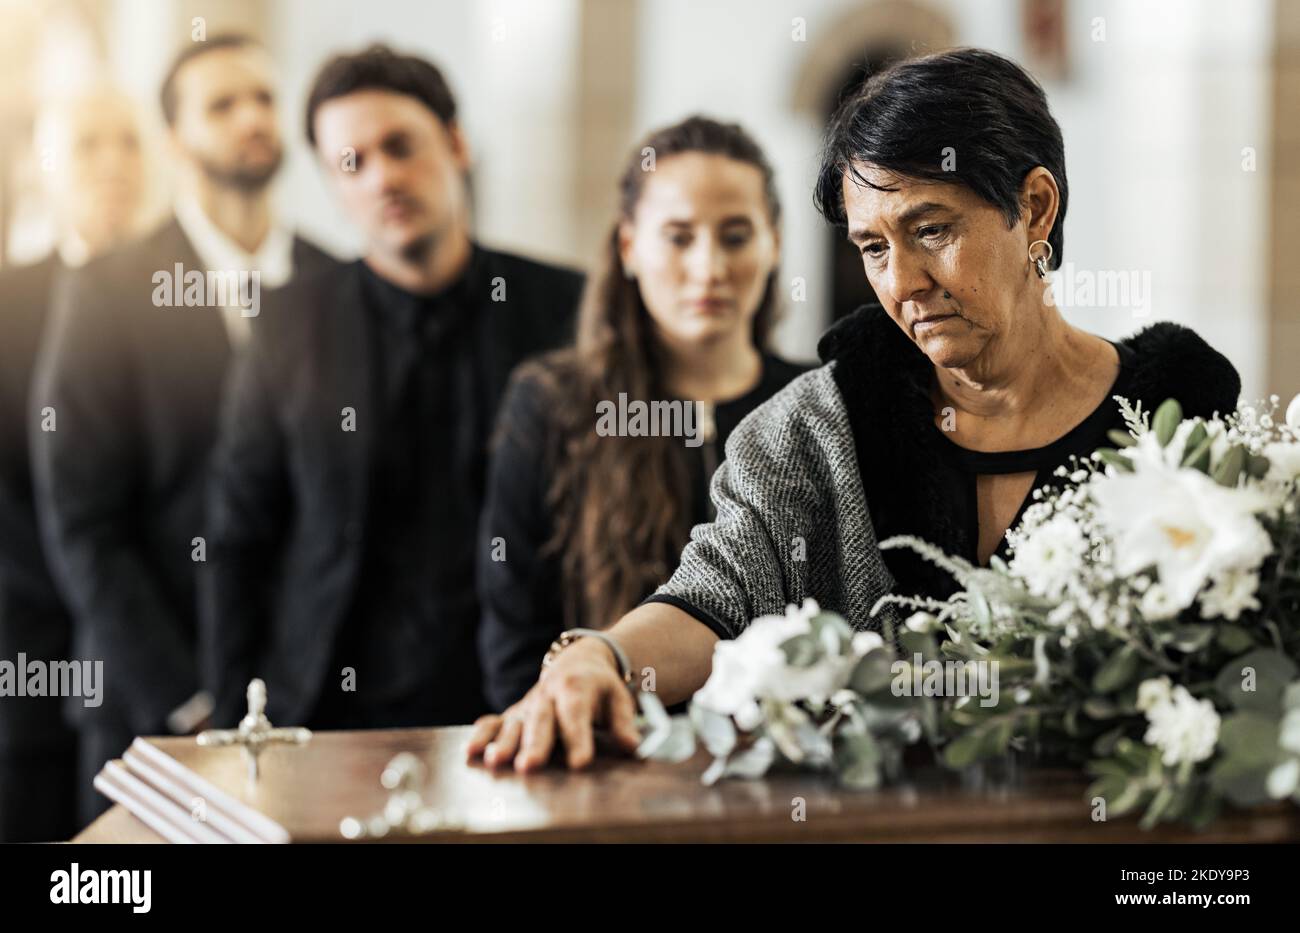 Funeral, death and coffin in church or Christian family gathering together for support. Religion, sad people and mourning loss or religious catholic Stock Photo